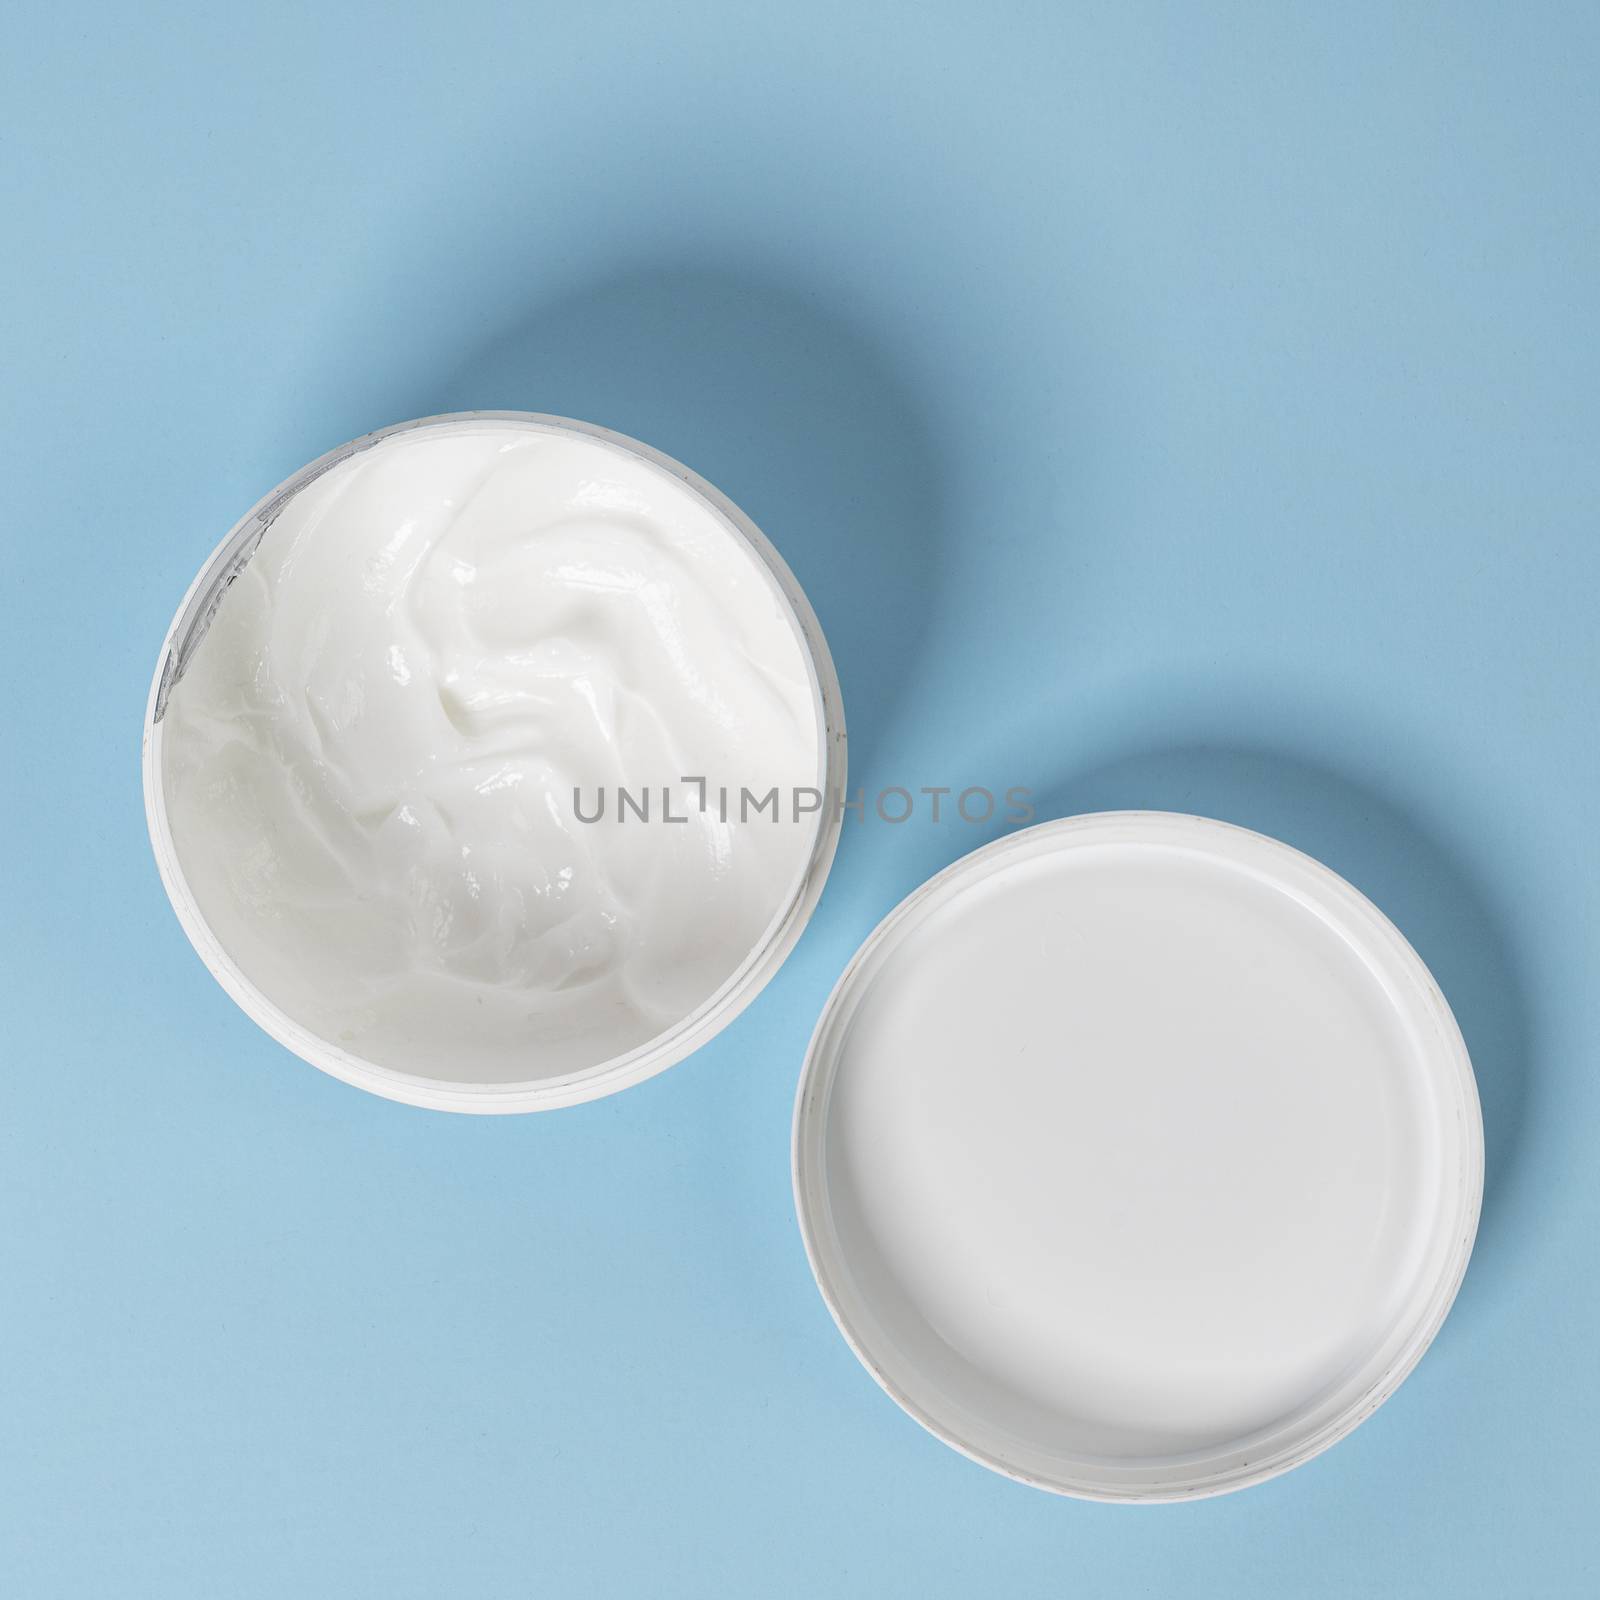 moisturizer cream isolated by sergiodv